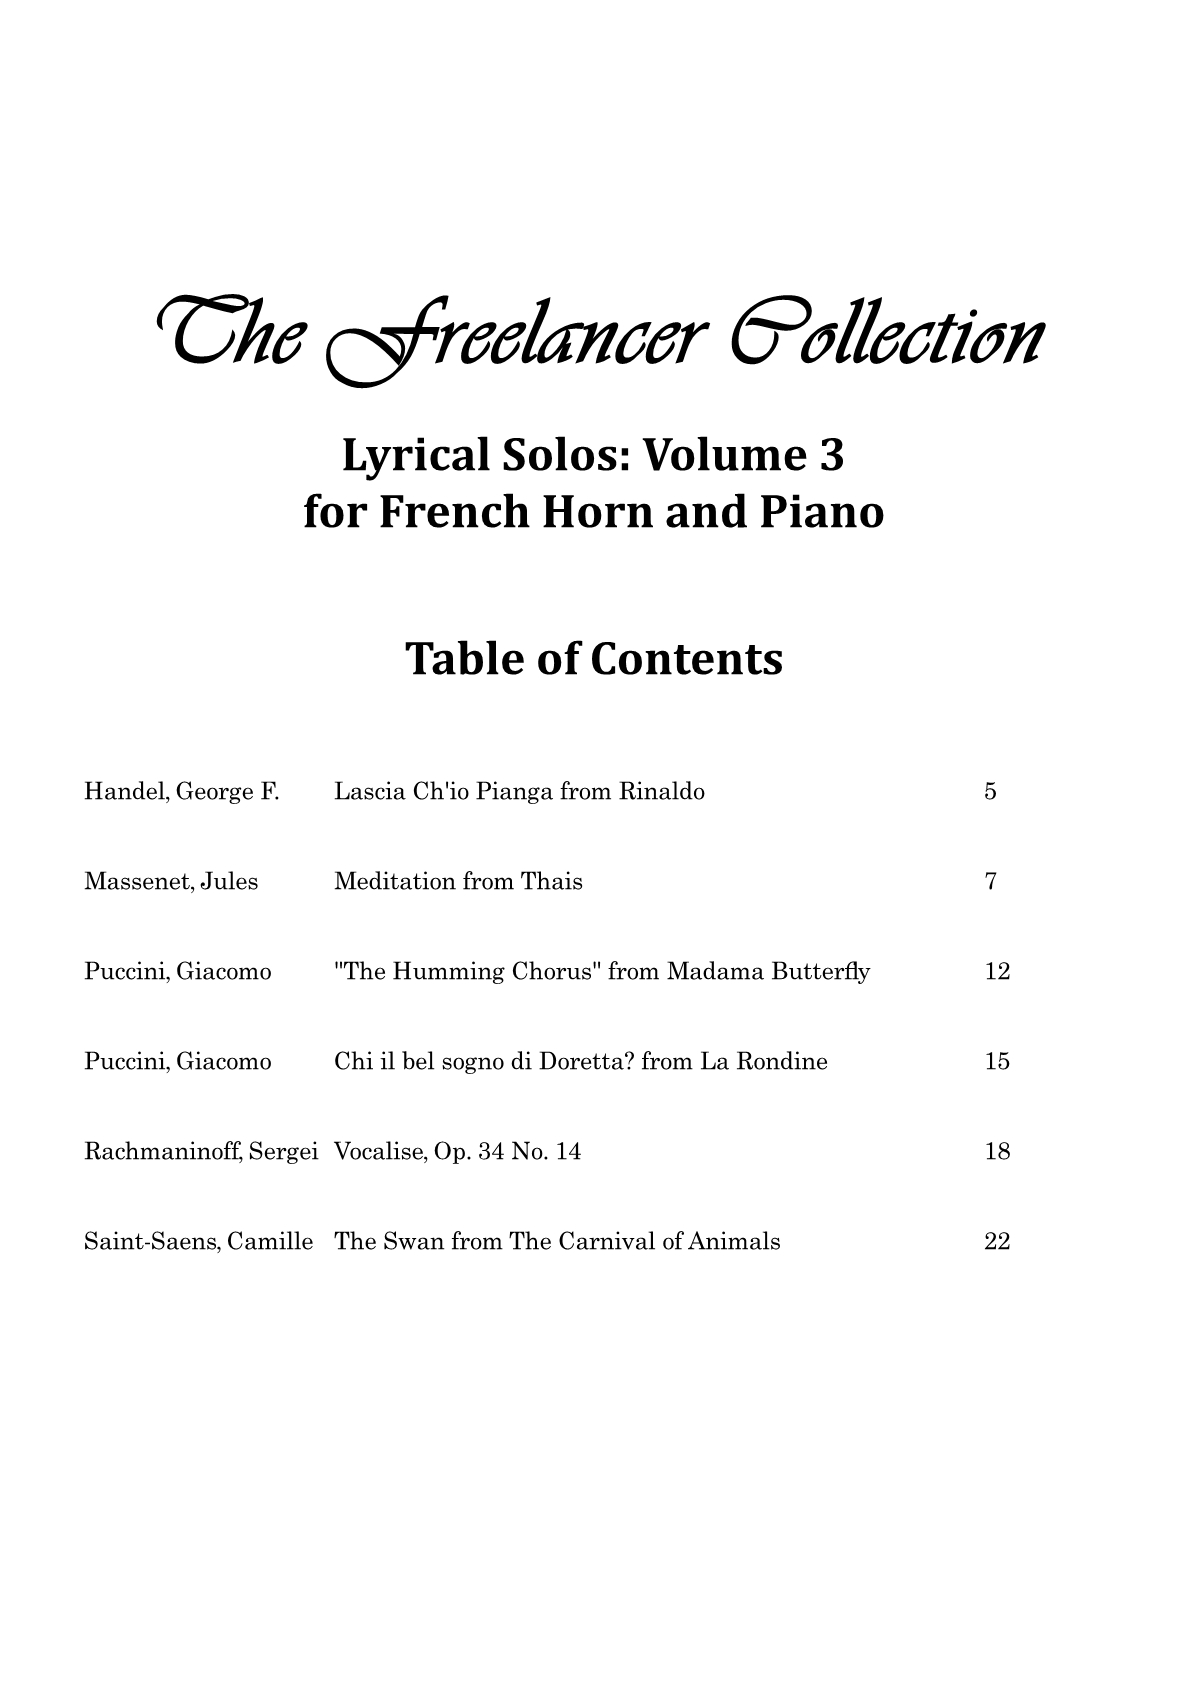 Hepler - Freelancer Collection Lyrical Solos Vol 4 (Hrn & Piano) - Click Image to Close